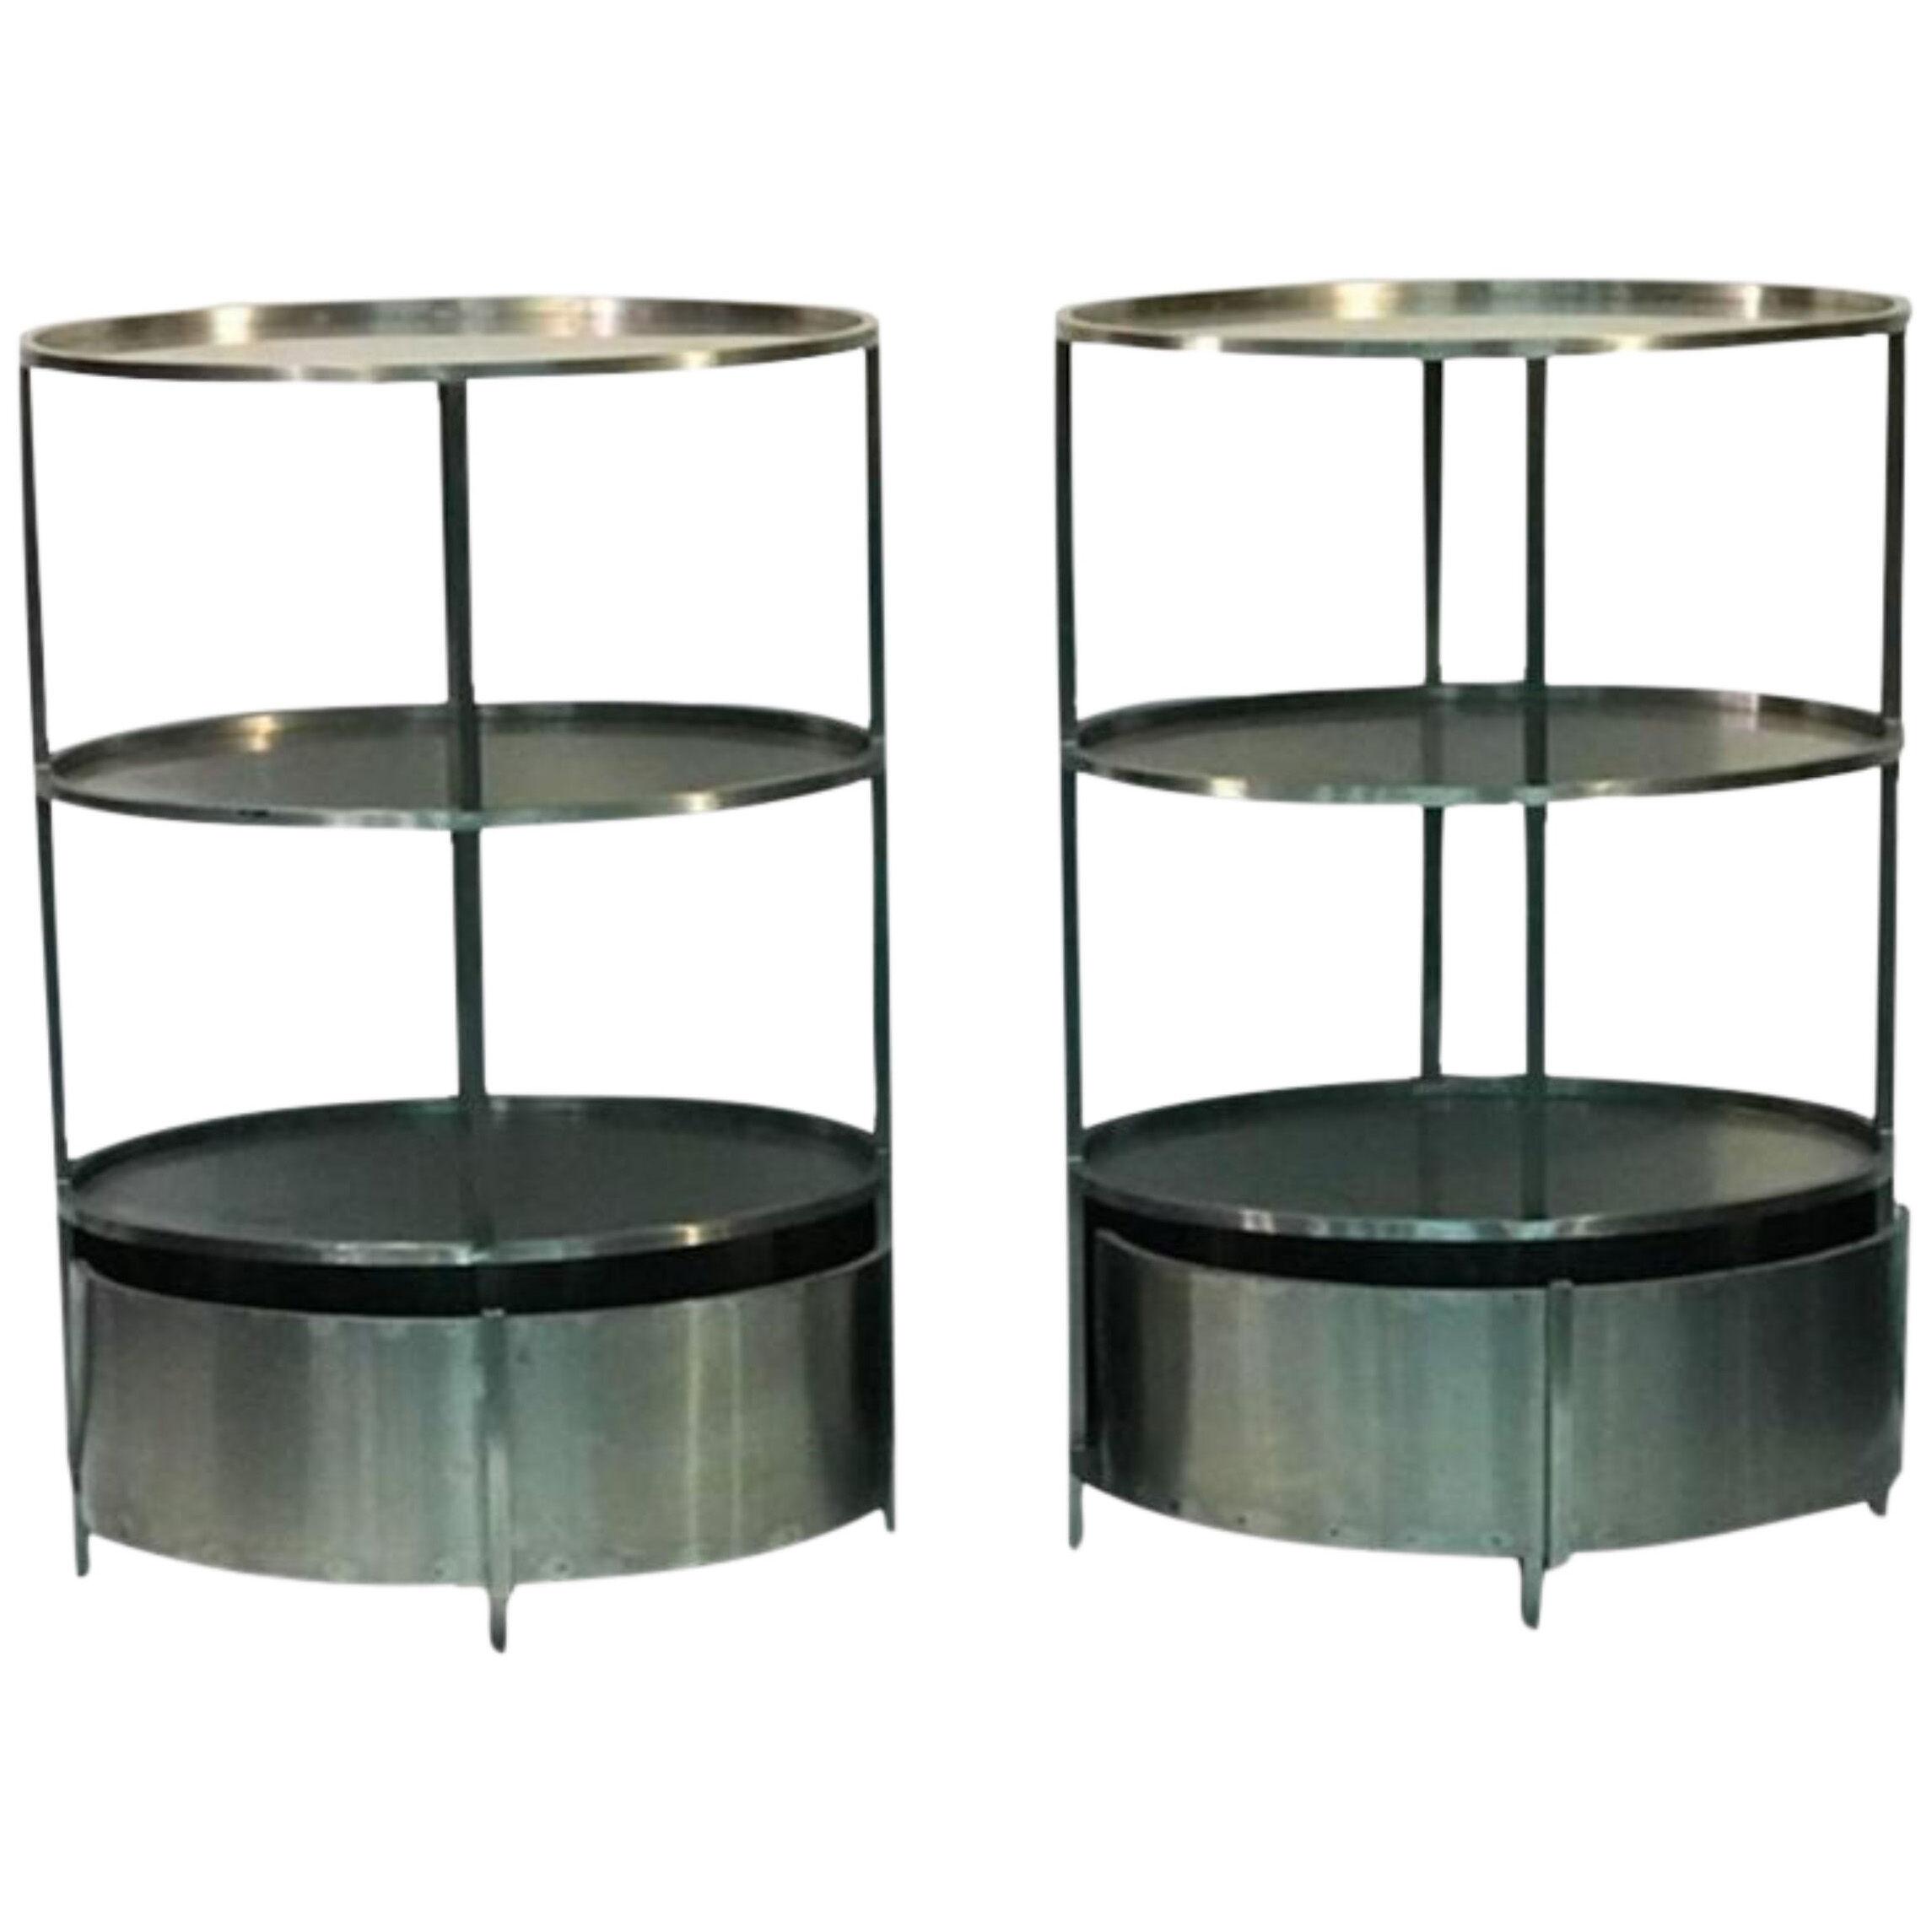 Modern Polished Steel Triple Tier Stands - a Pair	